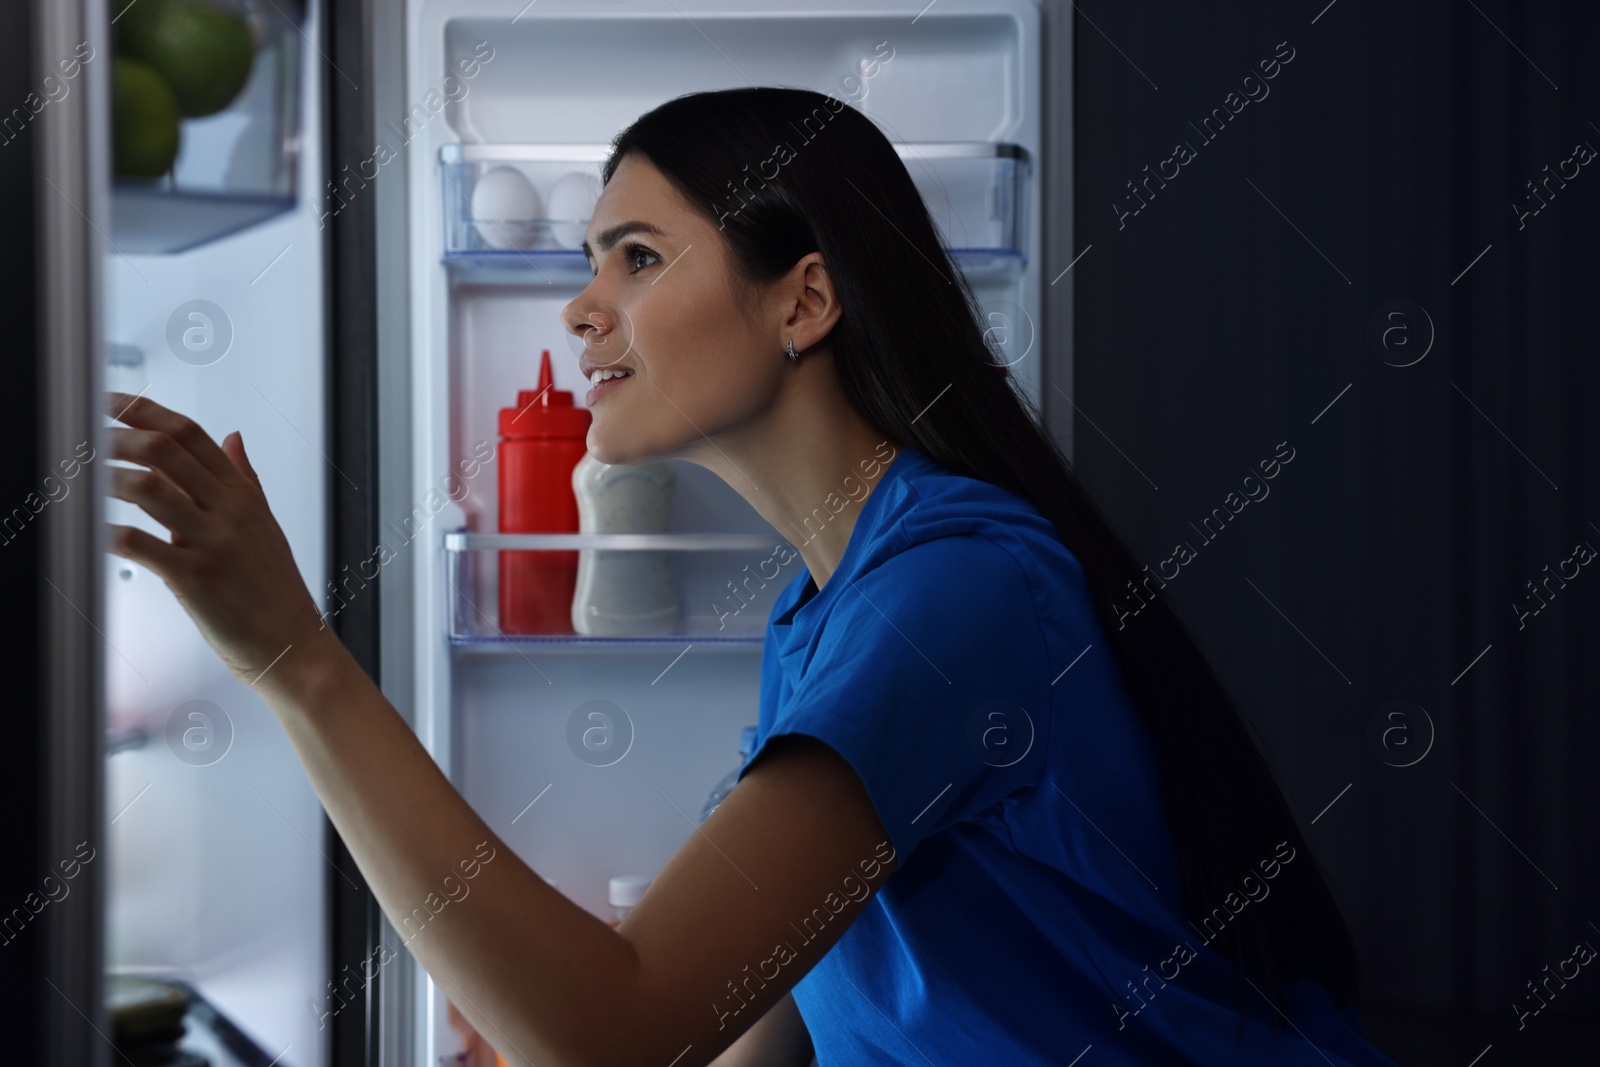 Photo of Young smiling woman looking into modern refrigerator at night